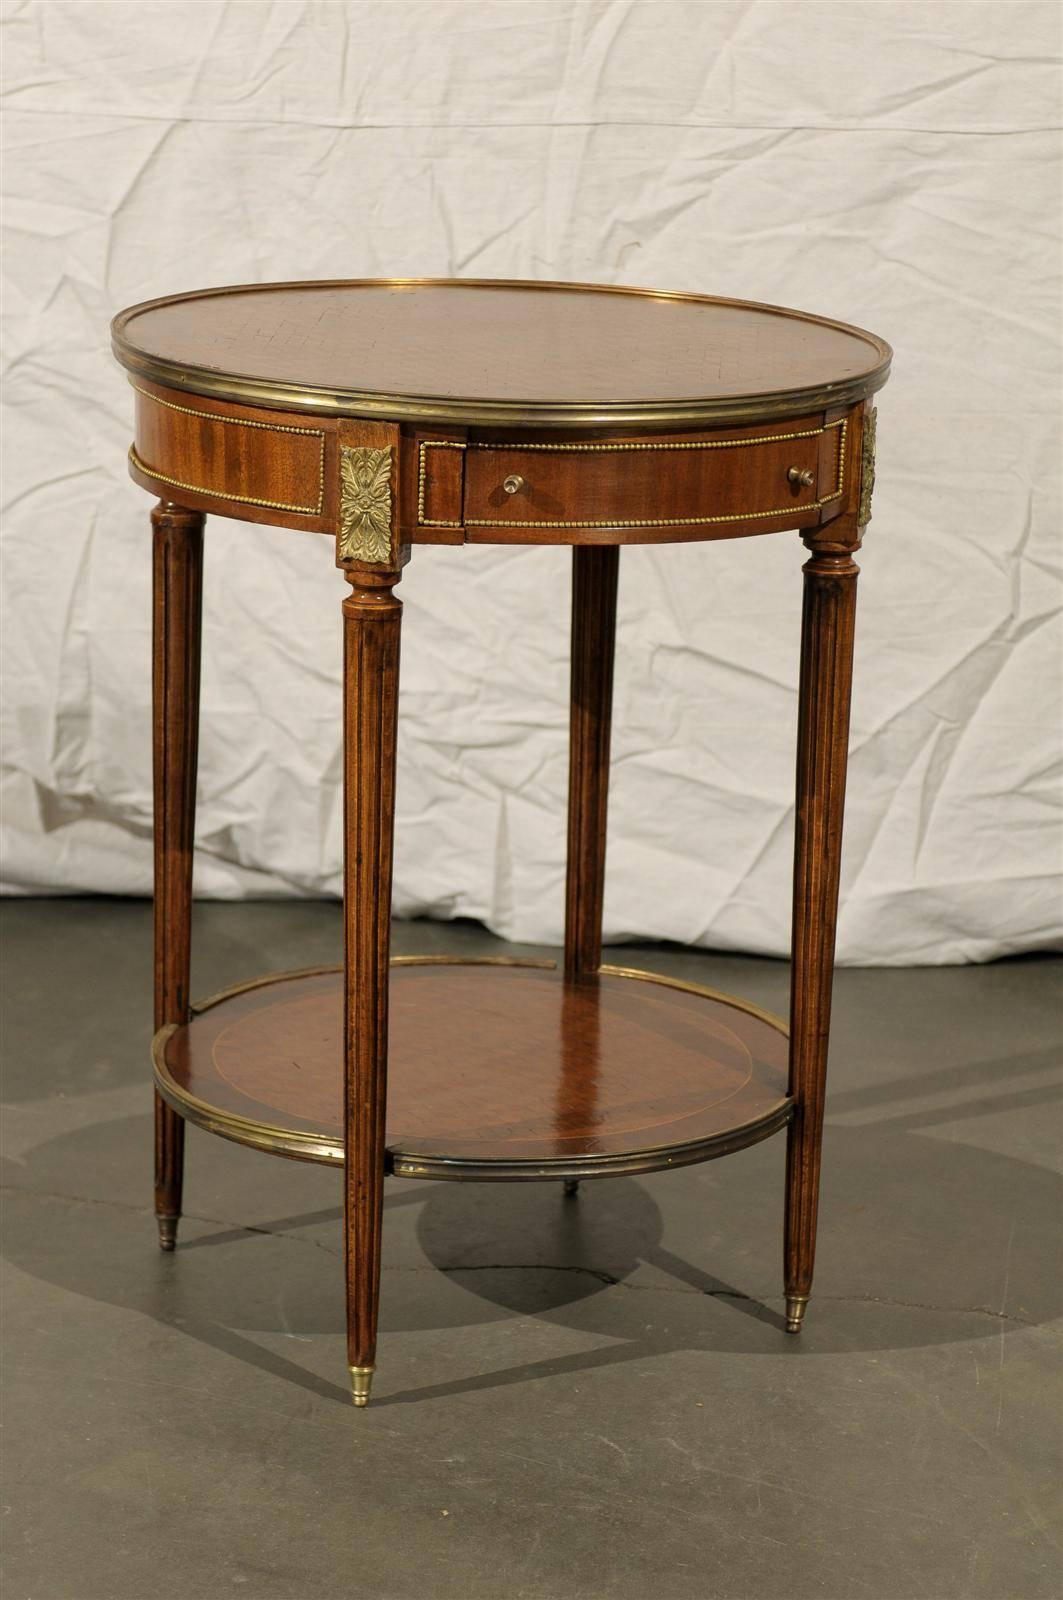 Early 20th century French bronze-mounted inlaid bouilotte table.